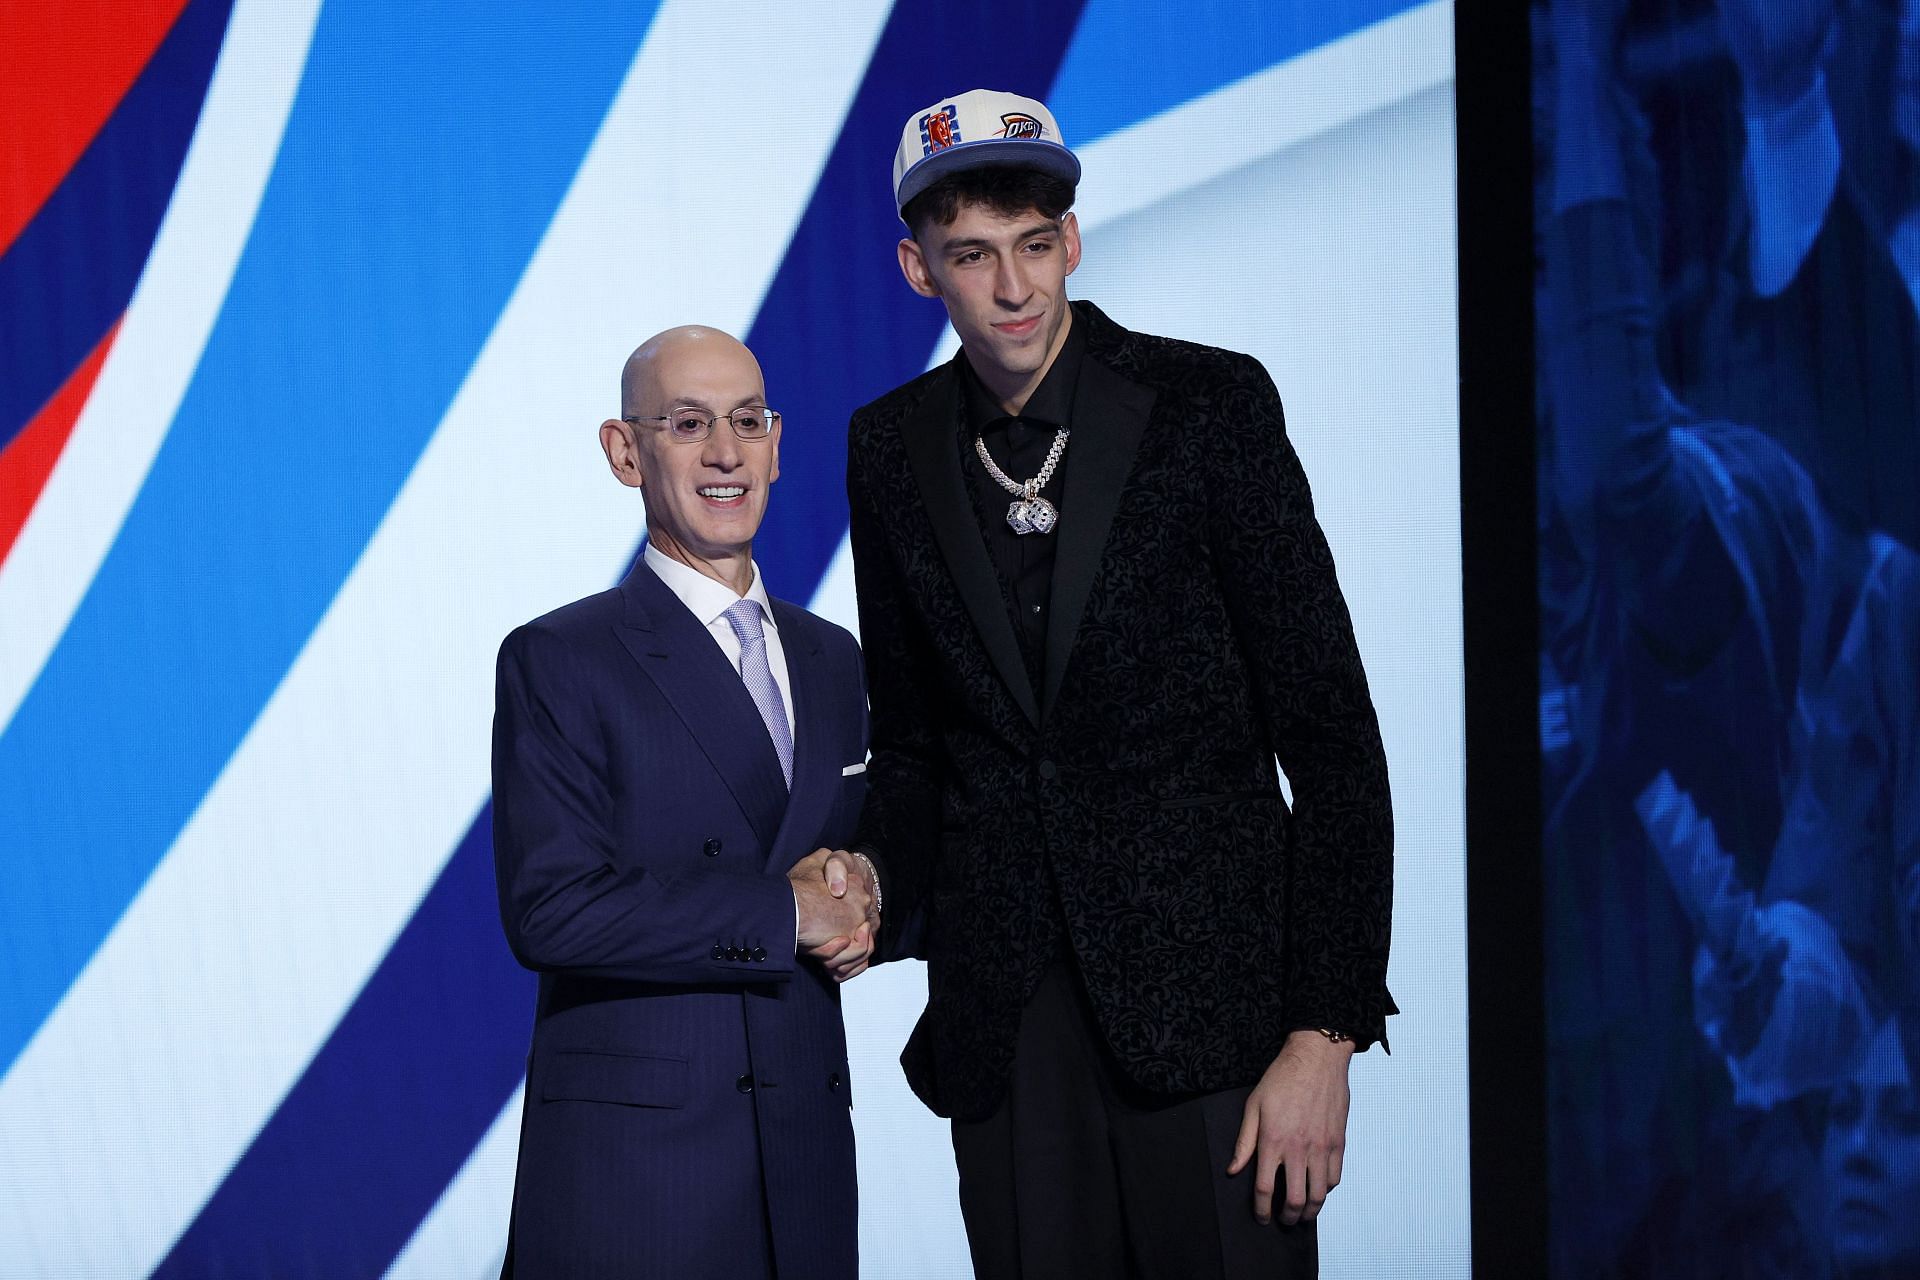 Chet Holmgren was the second pick in the 2022 NBA Draft